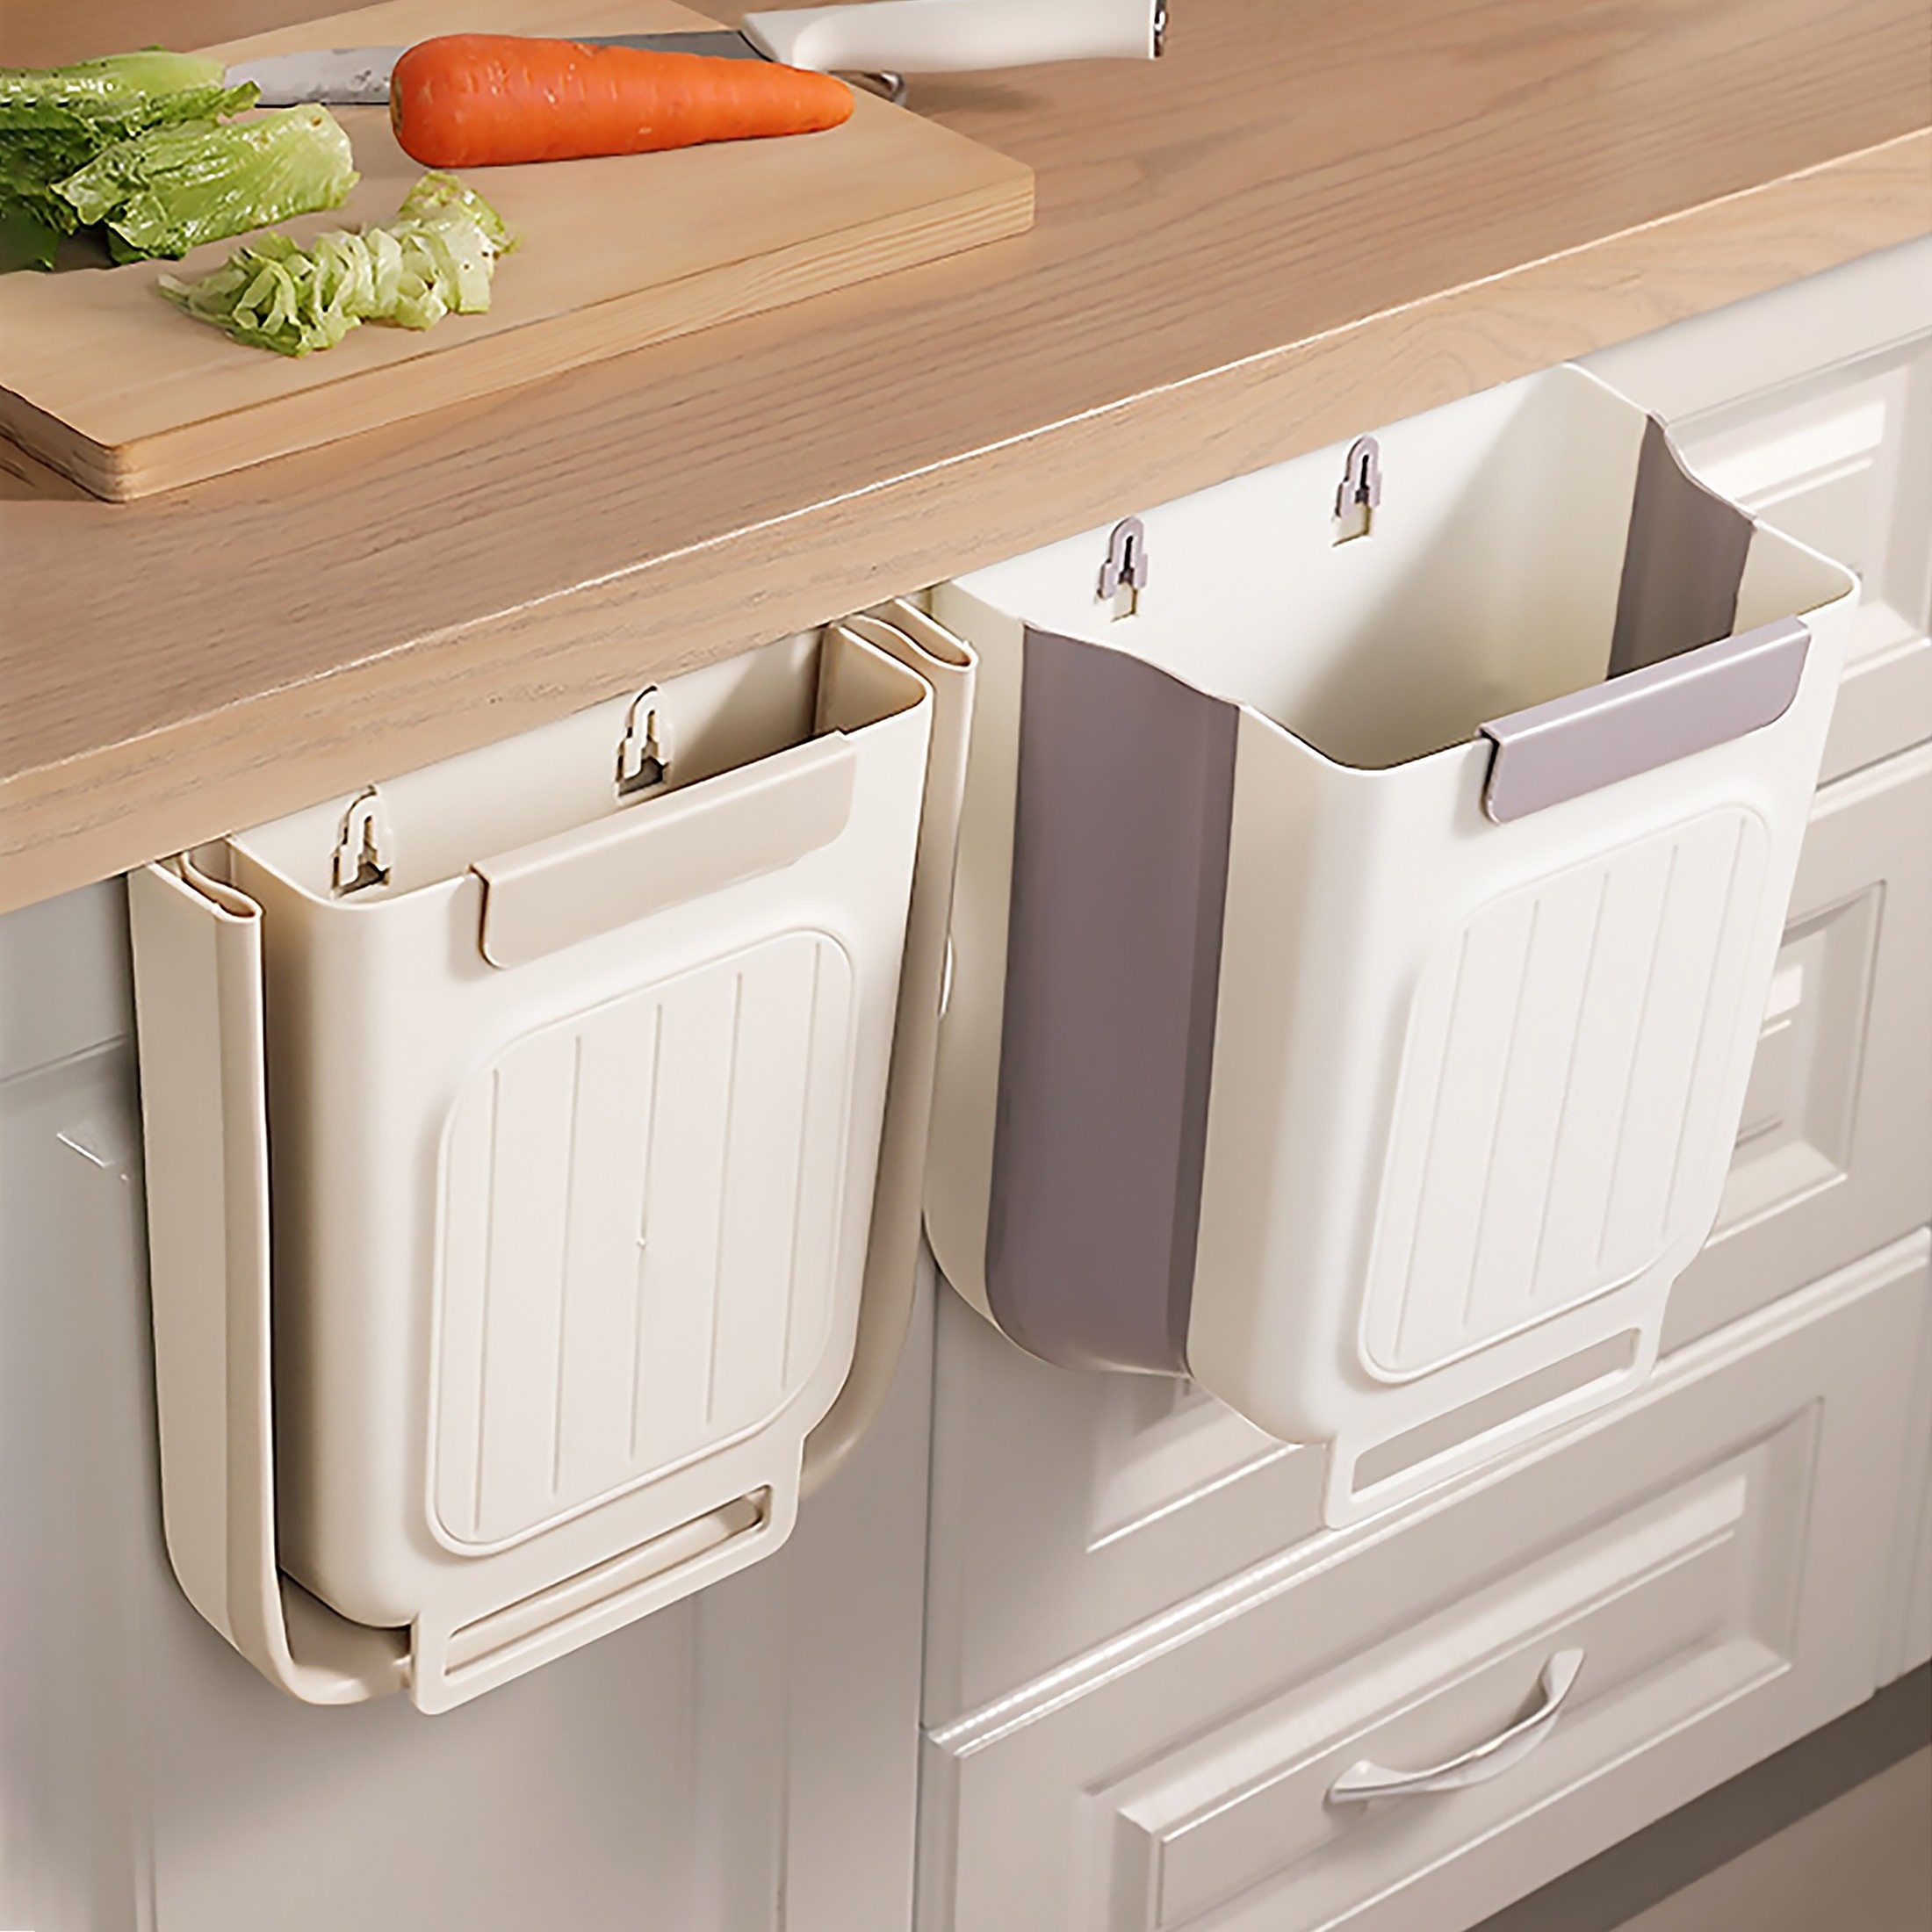 1pc Mini Folding Trash Can For Kitchen Cabinet Door Door Mounted